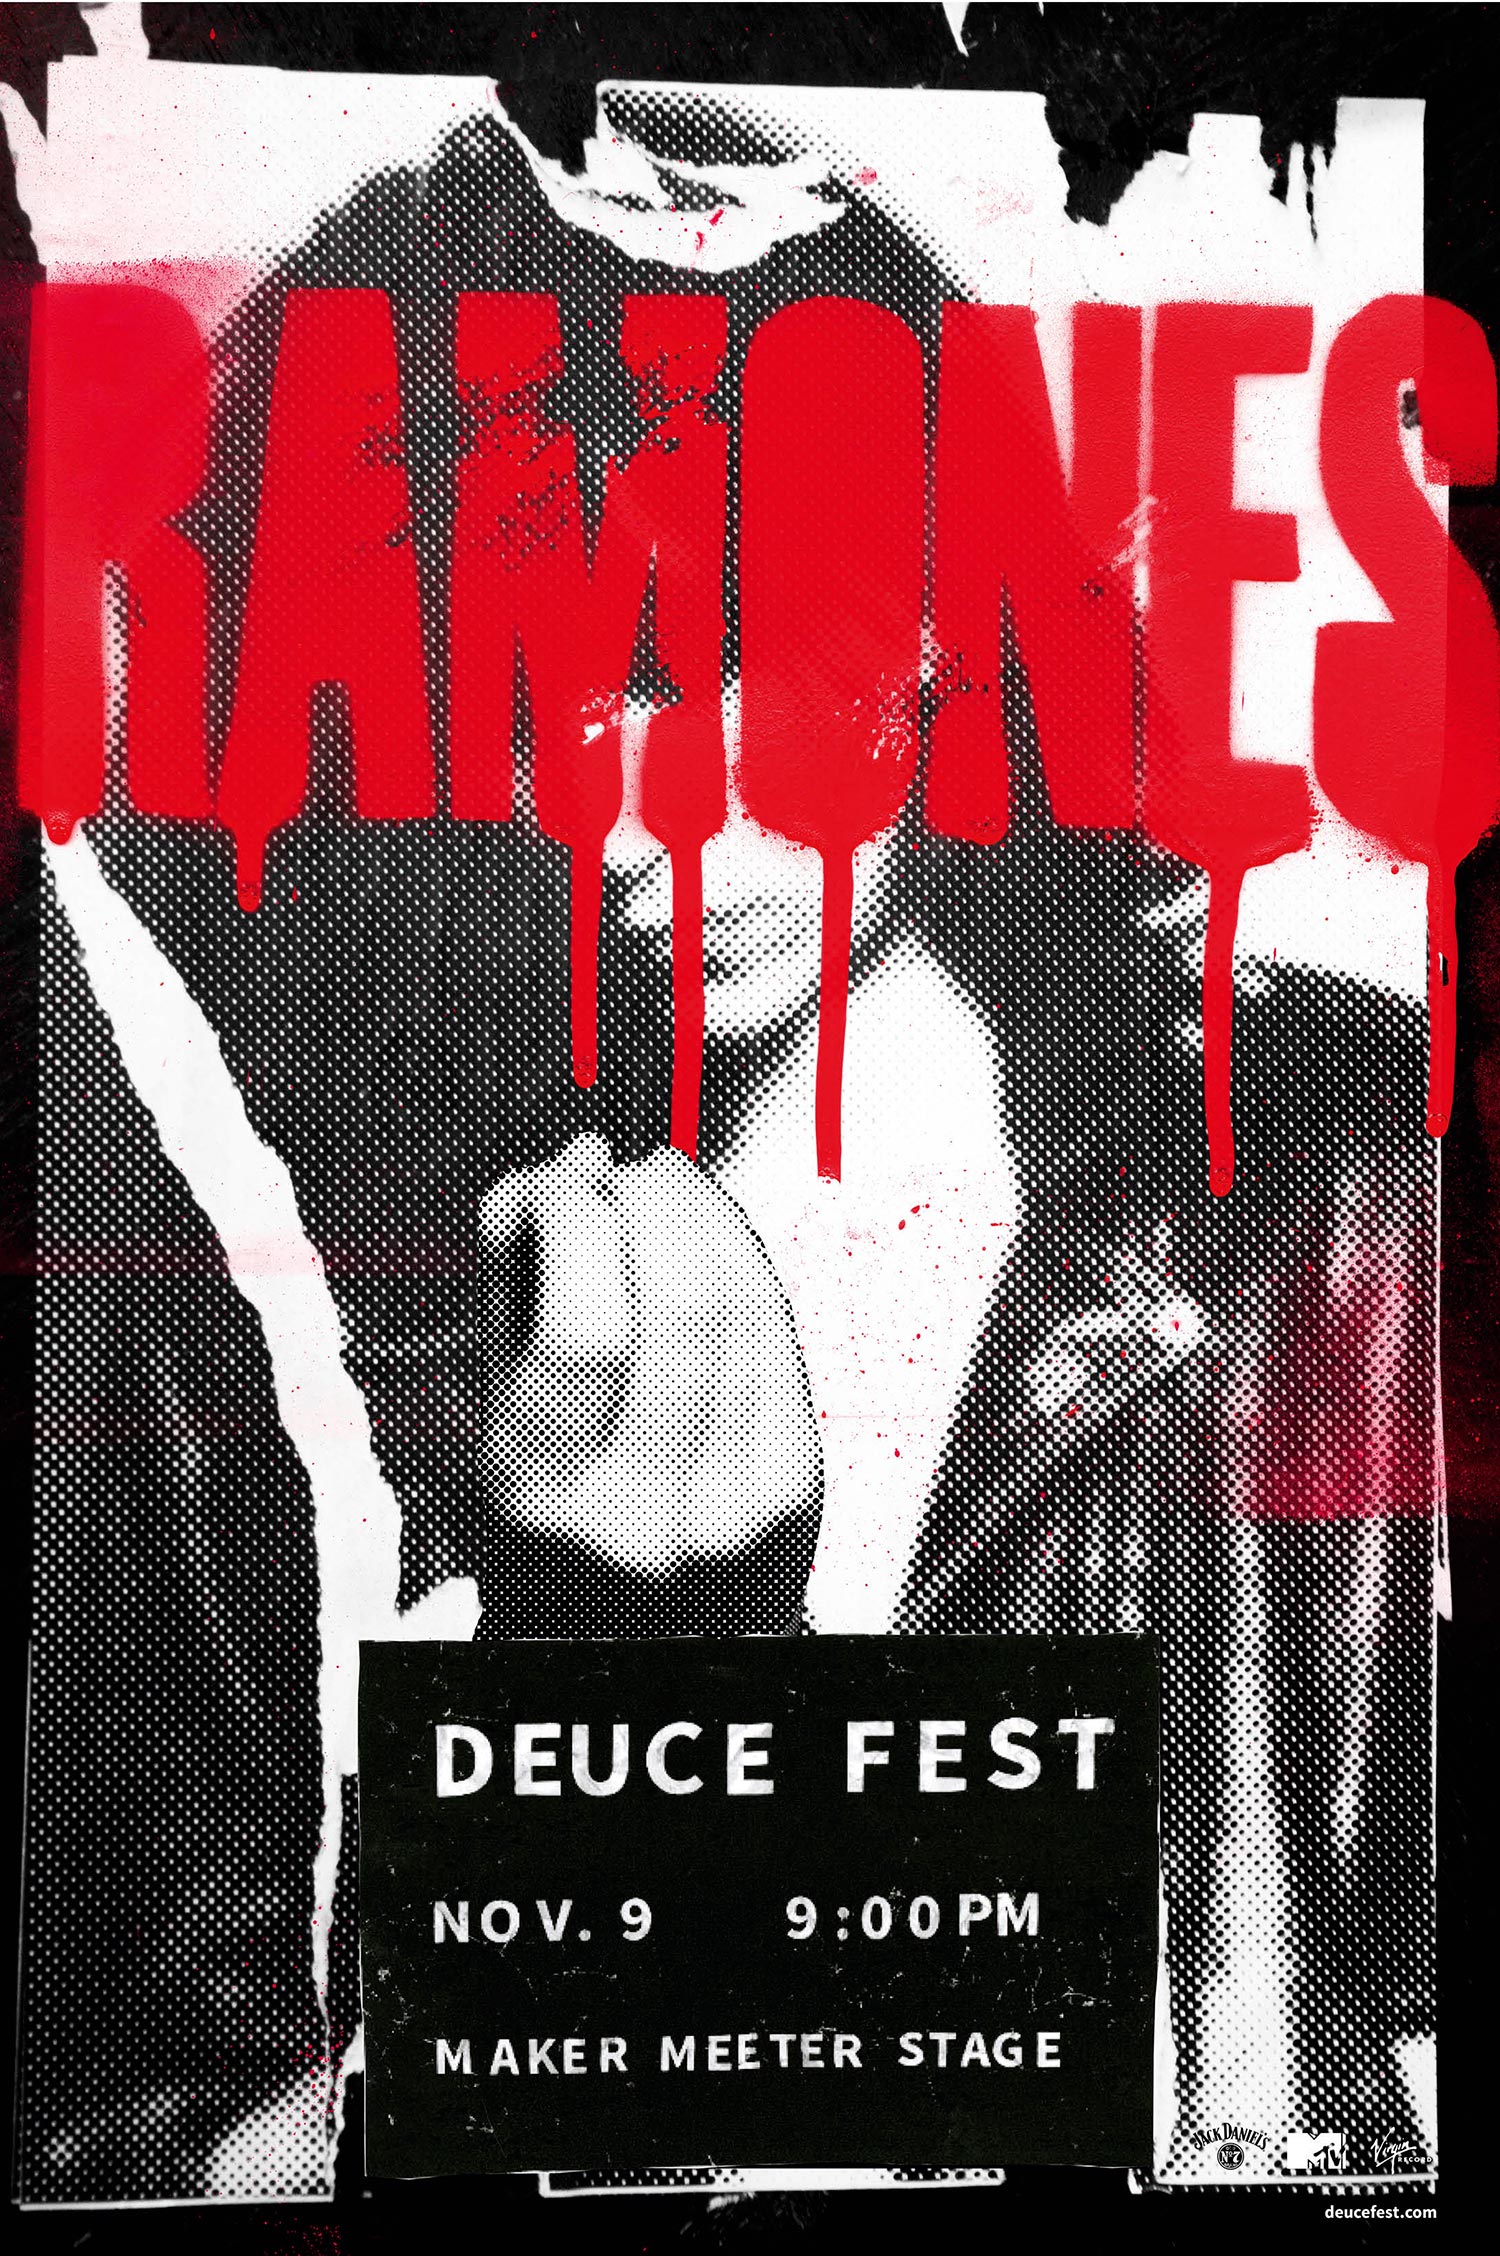 Ramones, Deuce Fest - illustrated poster by Rae Maher